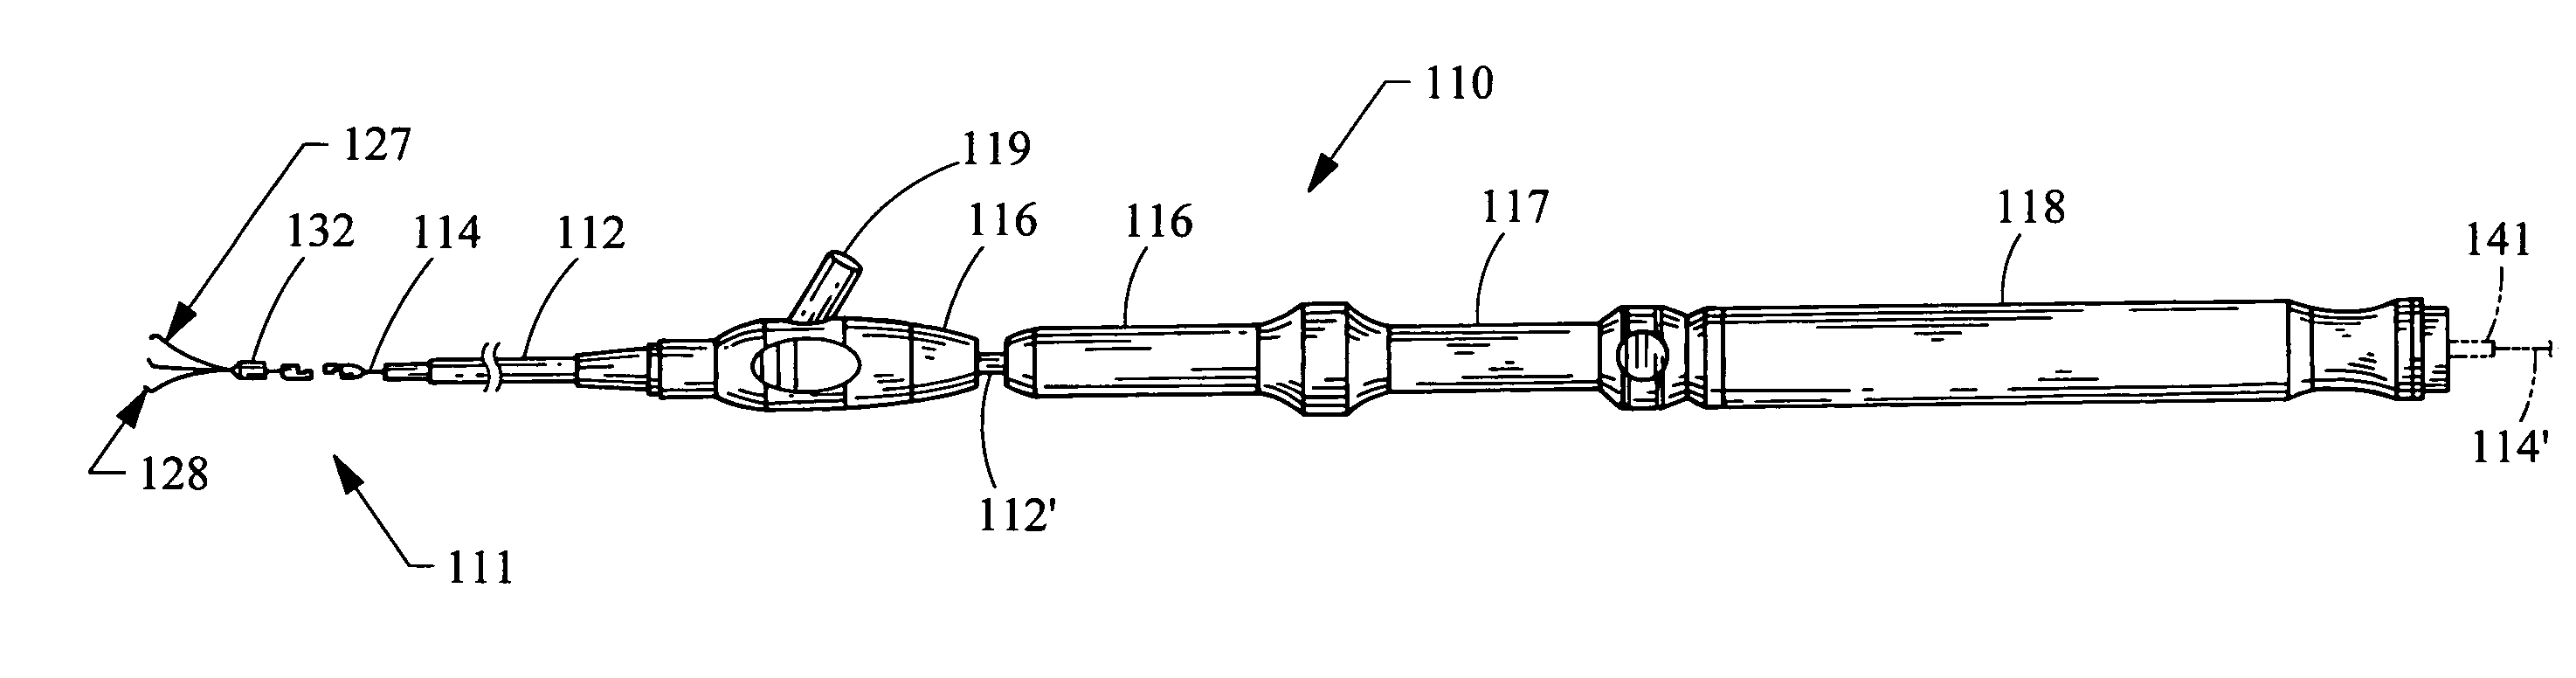 Clip device and protective cap, and methods of using the protective cap and clip device with an endoscope for grasping tissue endoscopically